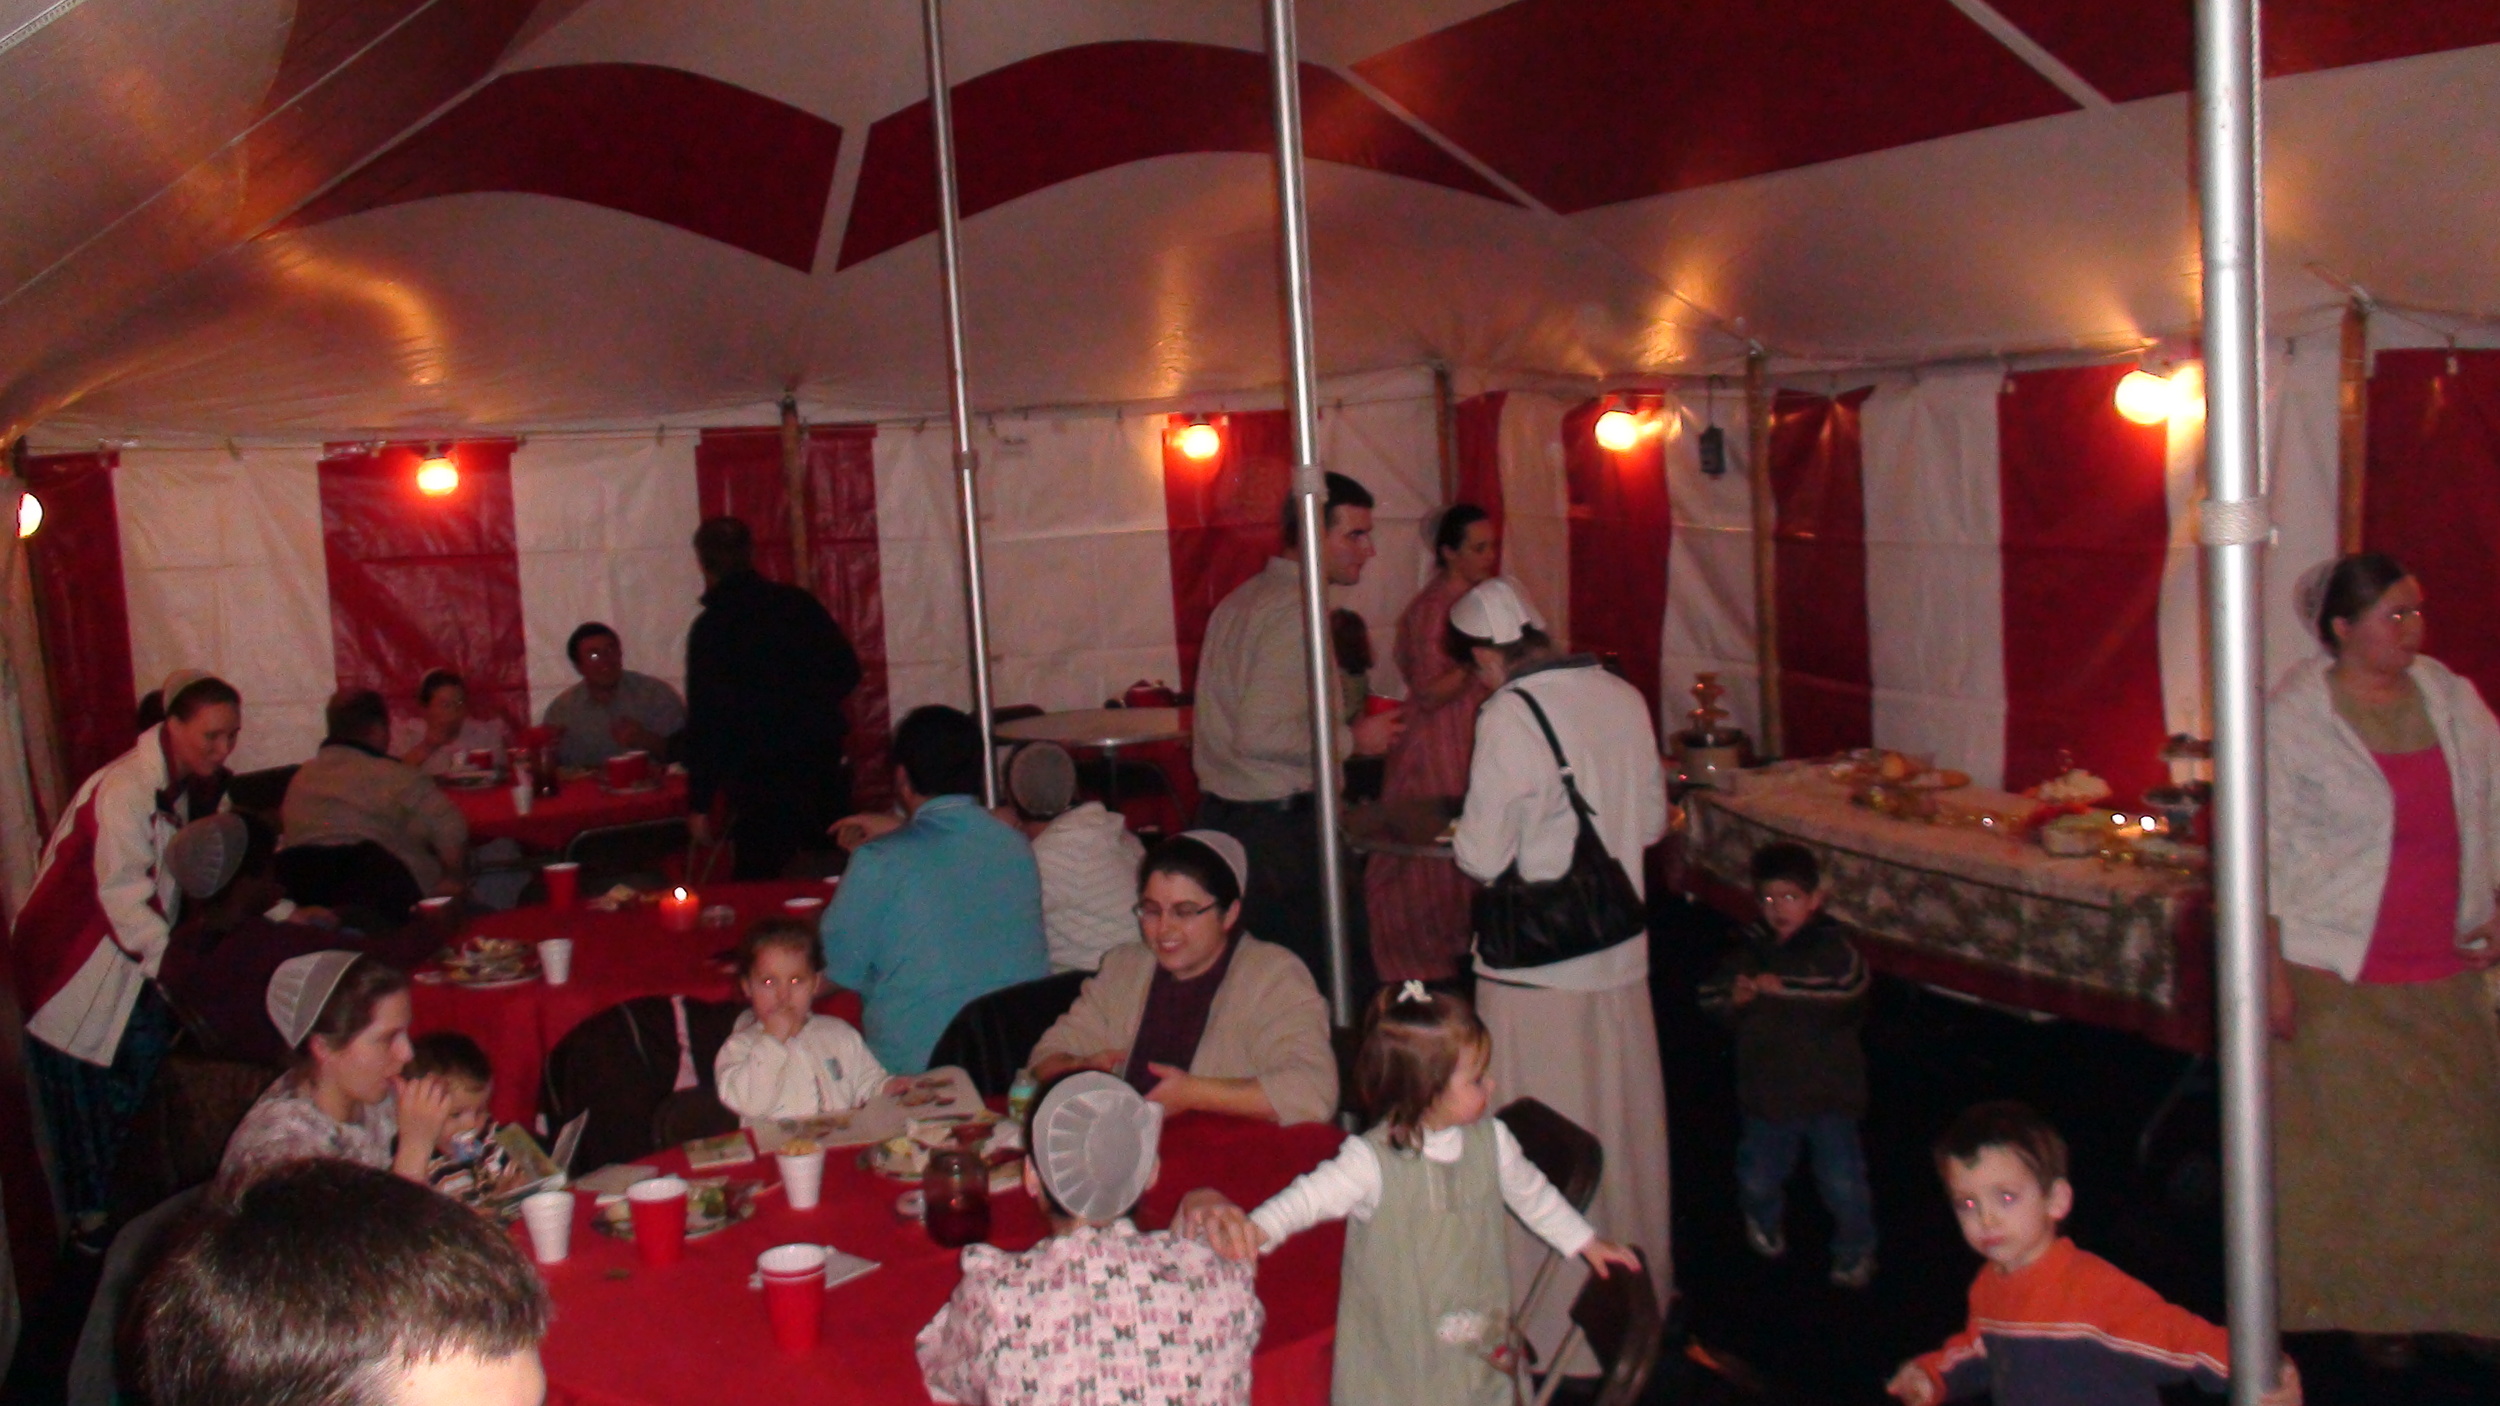 Winter Christmas party in a heated tent